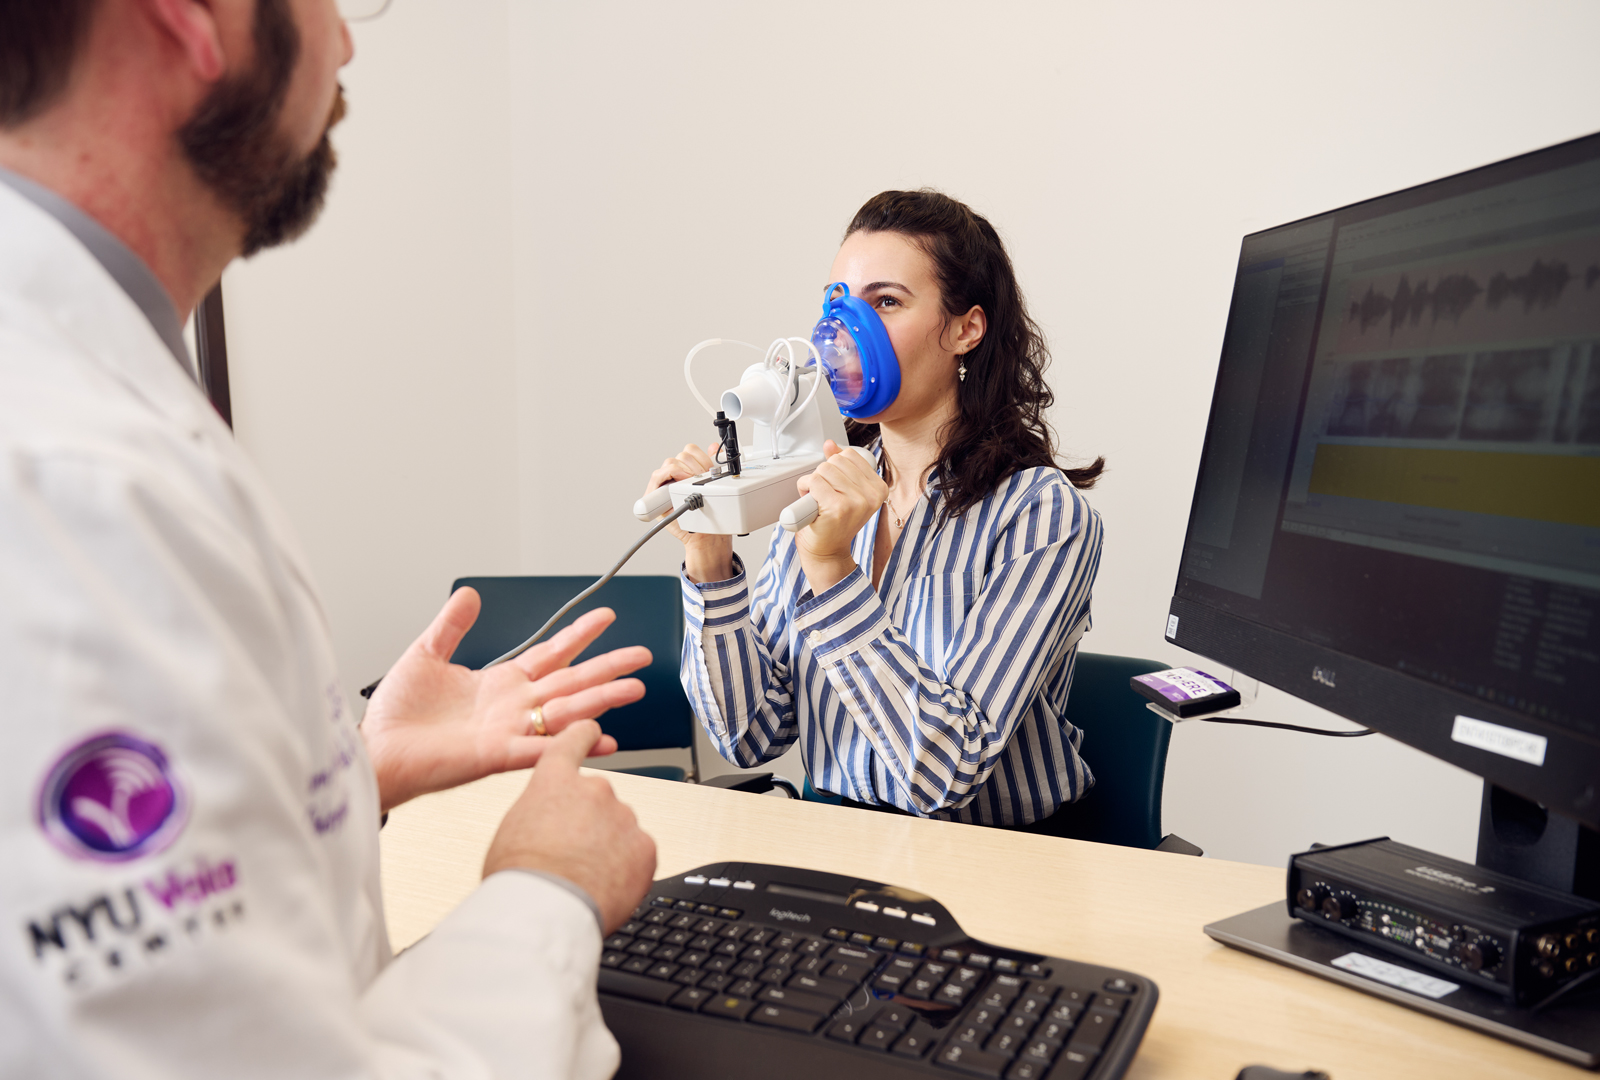 Provider looks on at patient wearing an apparatus around their mouth that is sending readouts about their voice to a computer